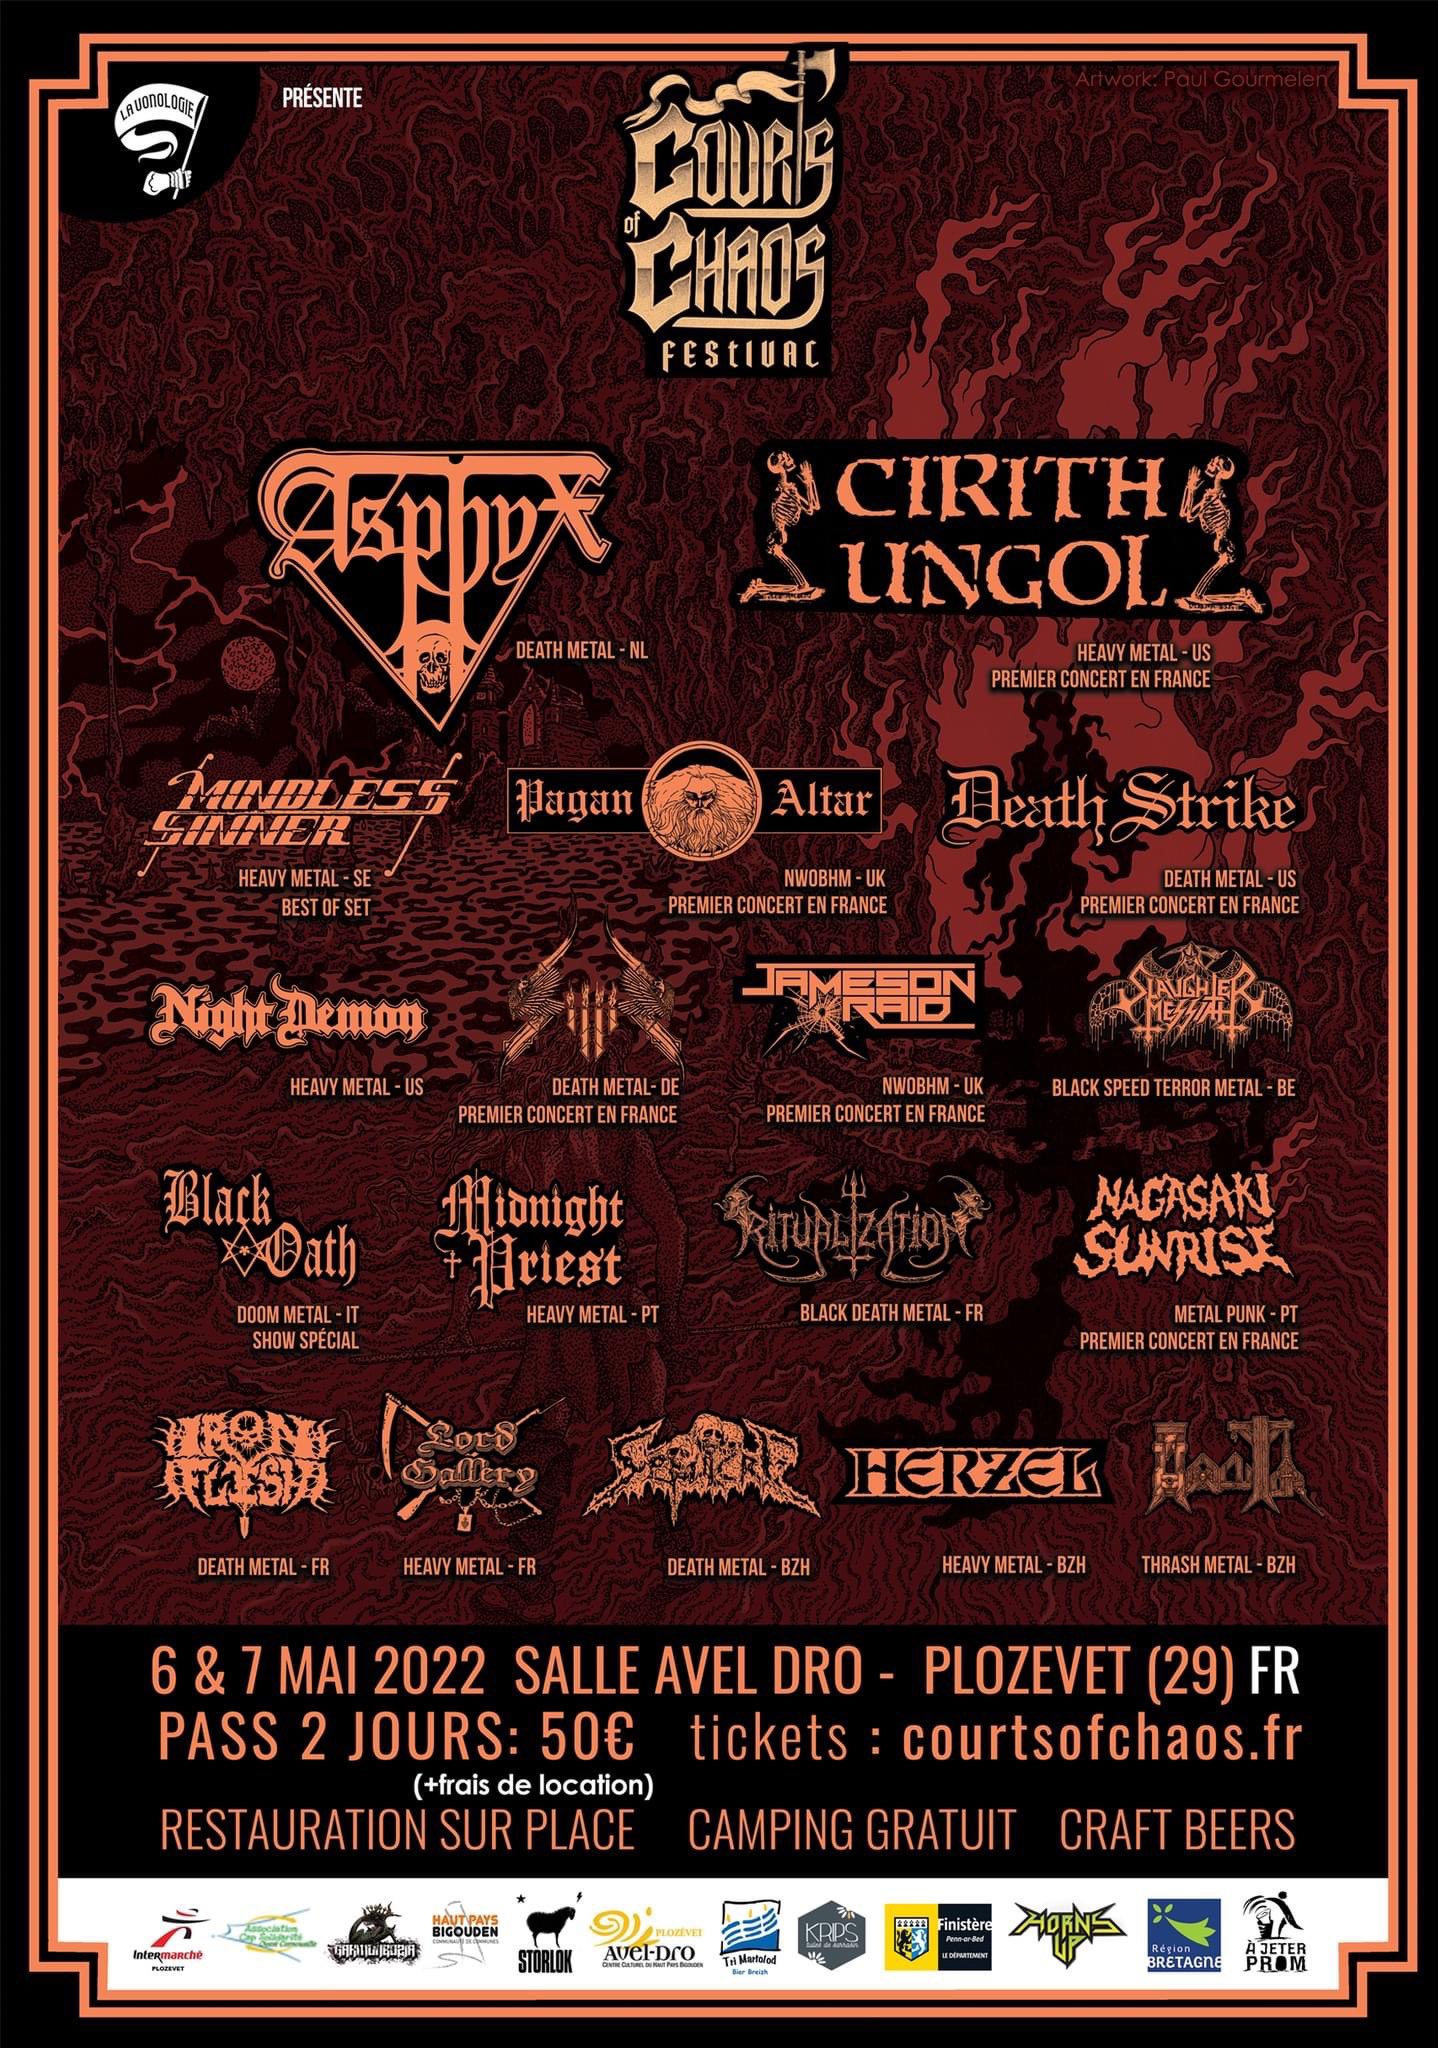 headlining the courts of chaos festival in brittany we will spread our message of doom across the land arise and join the legion twitter com pbs twimg com Cirith Ungol Online Most comprehensive and awesome resource for Cirith Ungol Headlining the “Courts of Chaos Festival” in Brittany! We will spread our message of Doom across the land! Arise and Join the Legion! [twitter.com] [pbs.twimg.com]